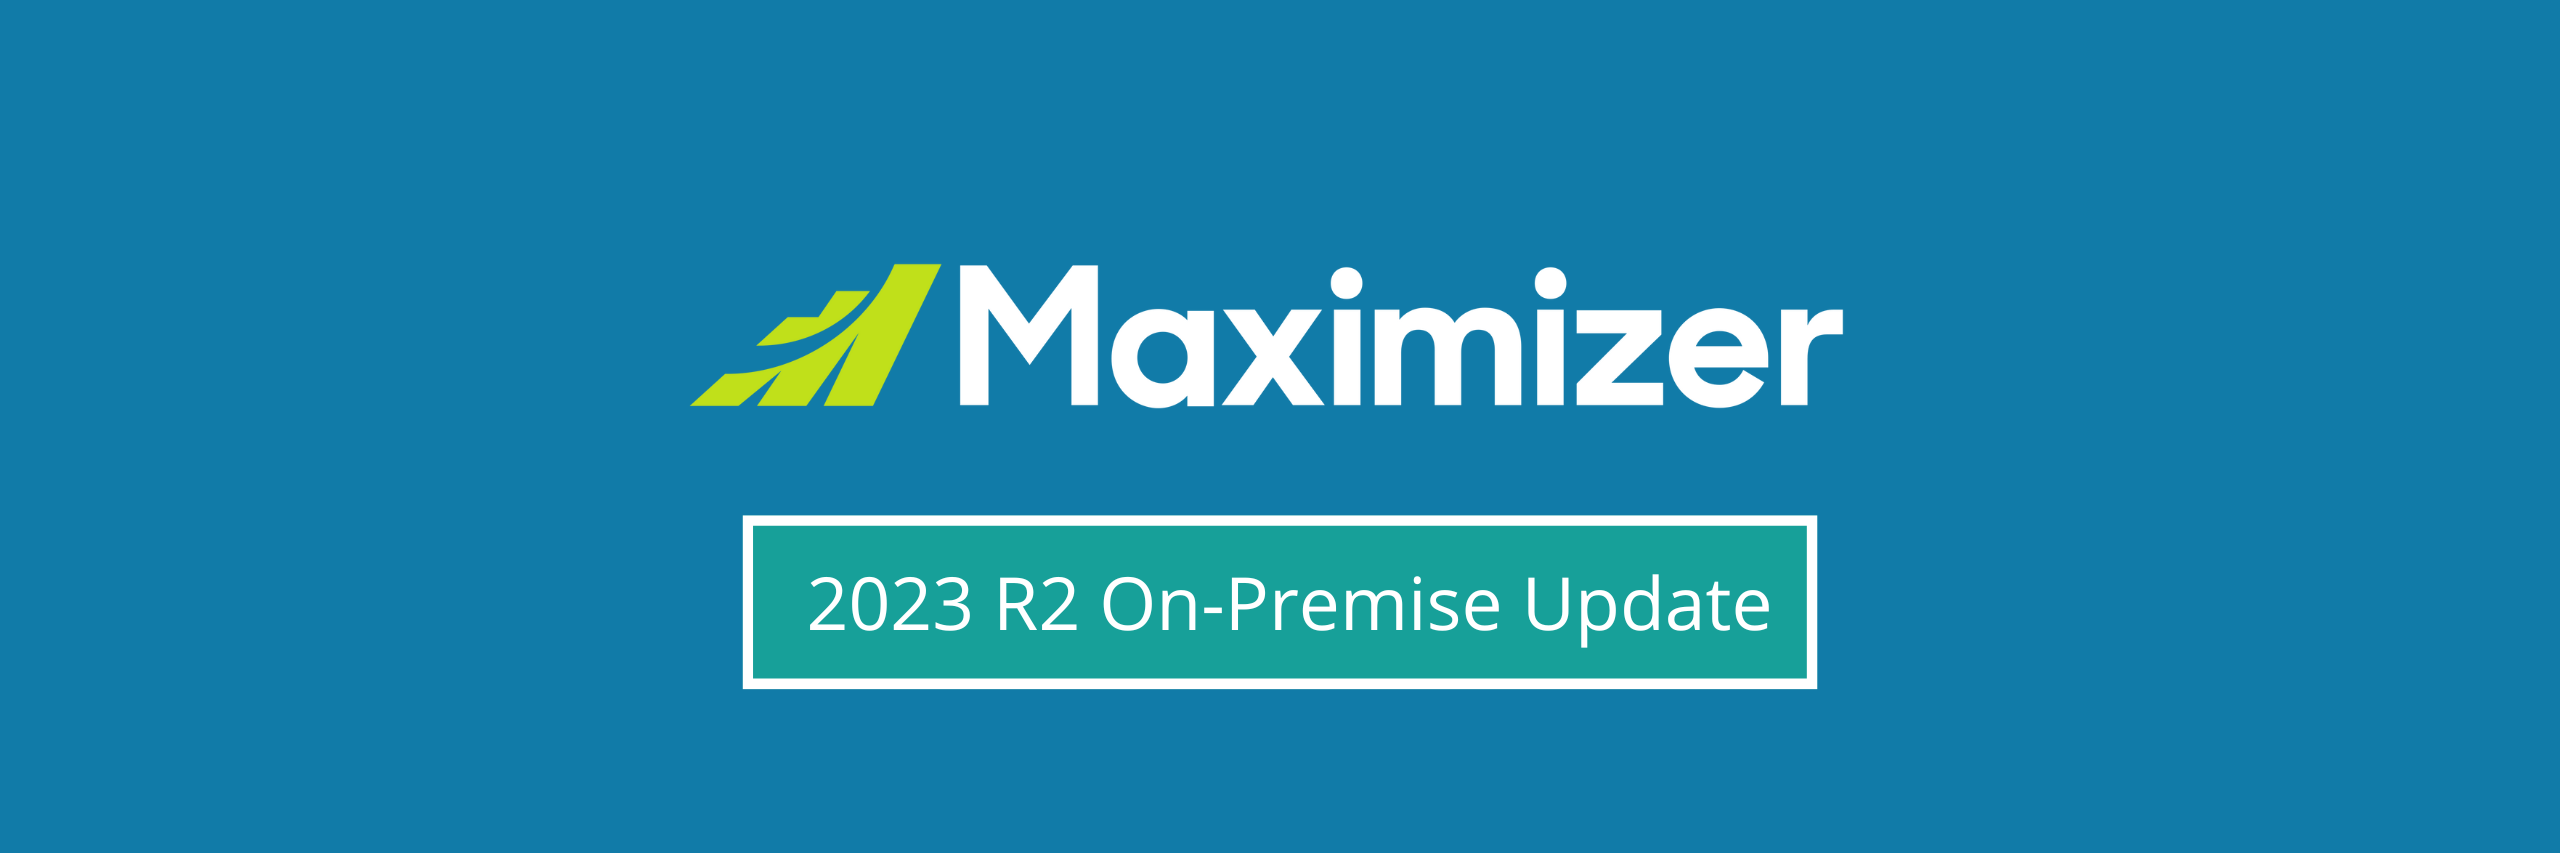 Maximizer 2023R2 On-Premise Update